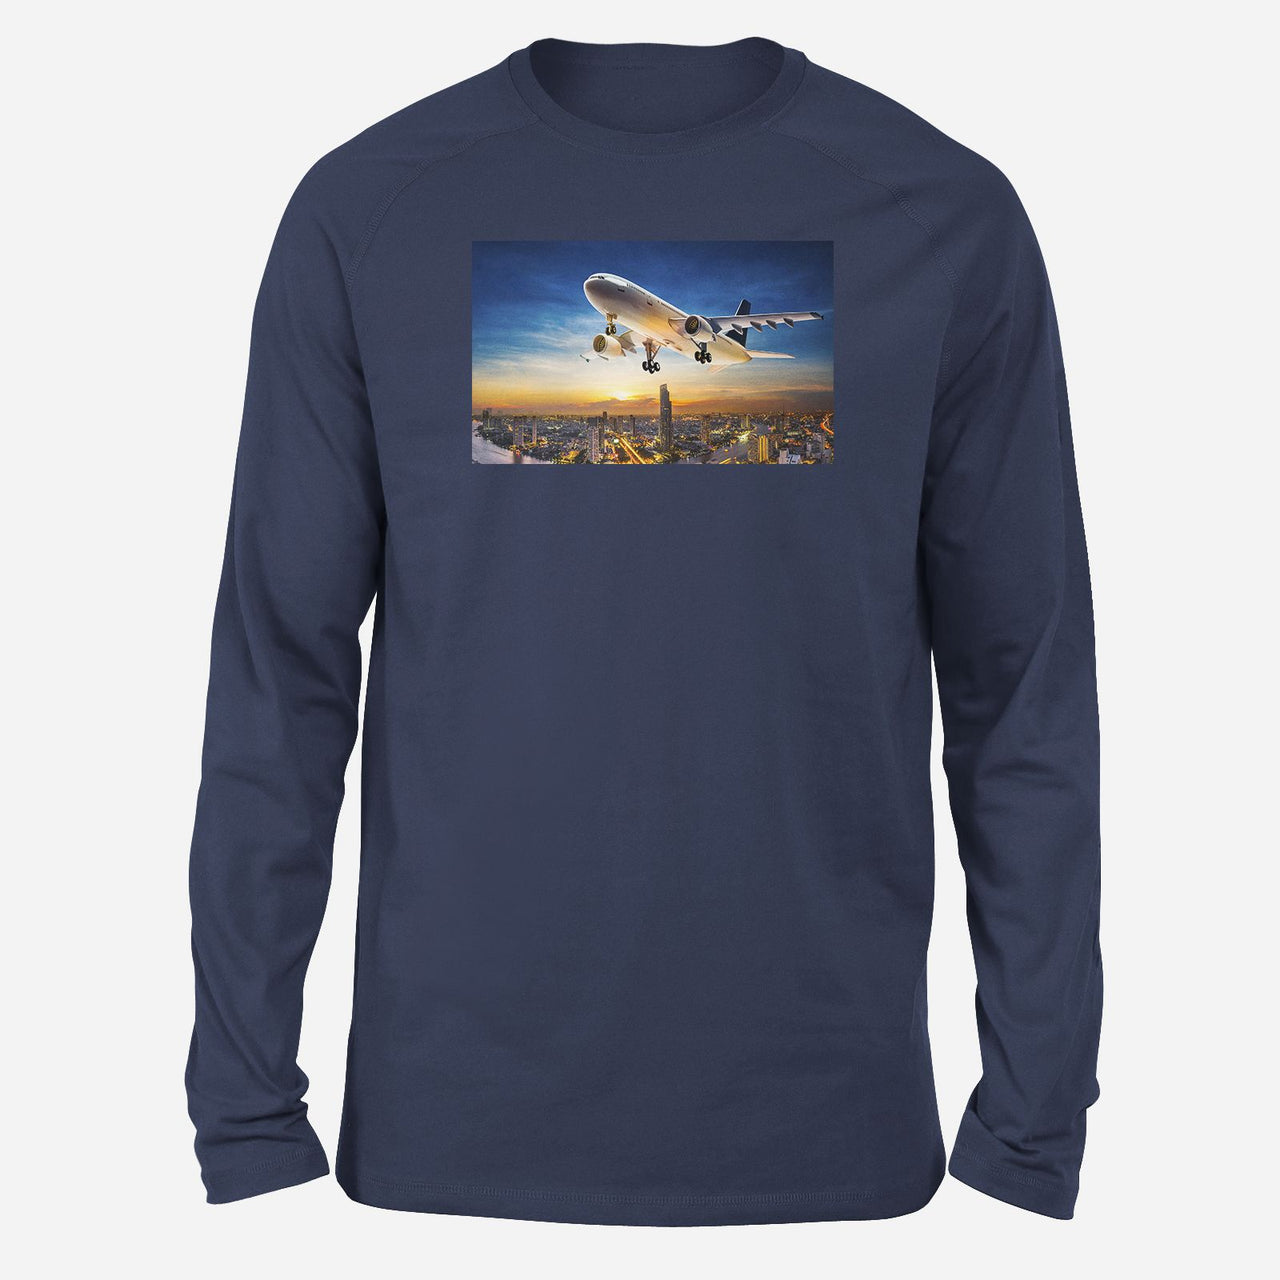 Super Aircraft over City at Sunset Designed Long-Sleeve T-Shirts